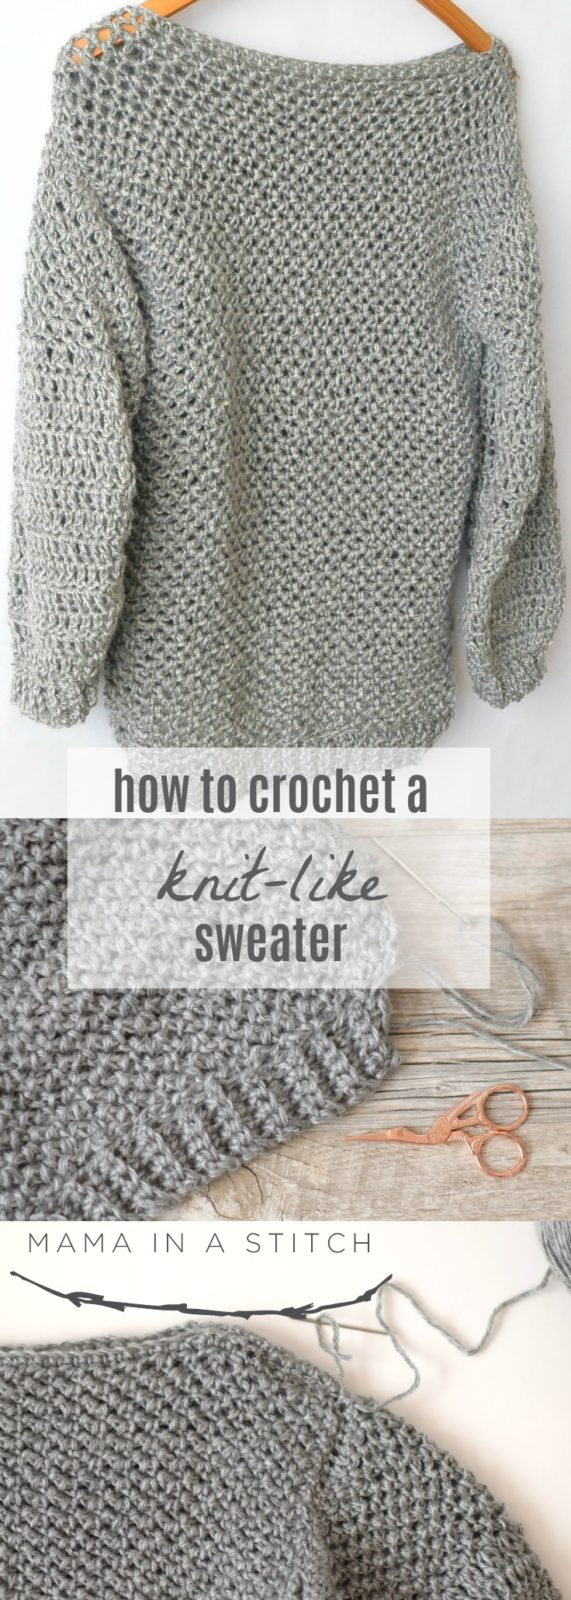 Free Crochet Patterns Womens Sweaters How To Make An Easy Crocheted Sweater Knit Like Mama In A Stitch